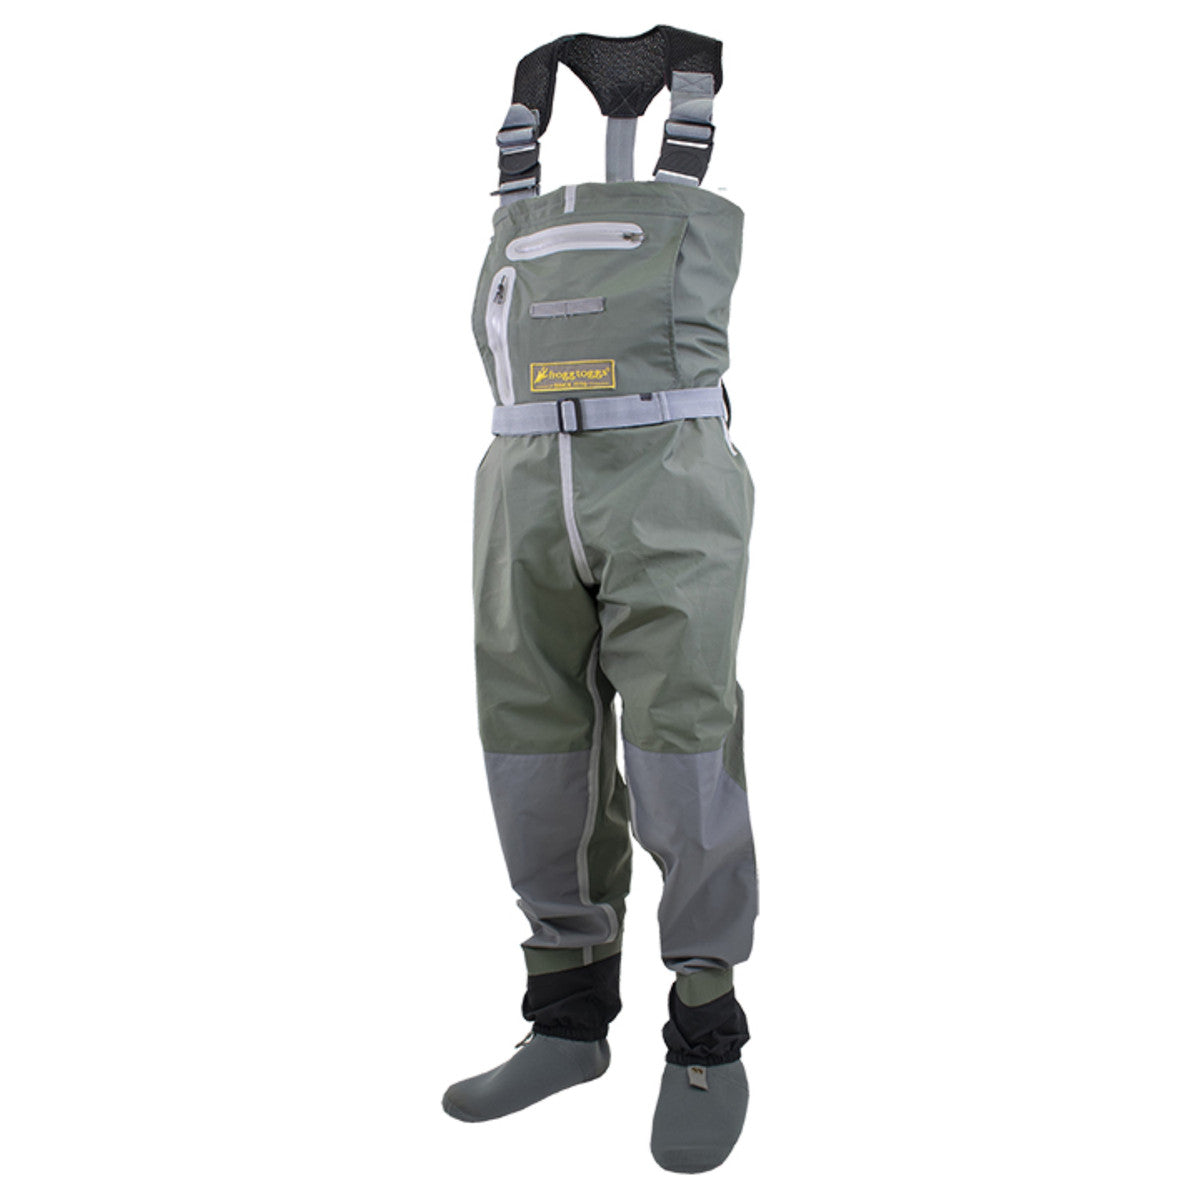 Frogg Toggs, Frogg Toggs Pilot River Guide HD Stocking Foot Wader, verde